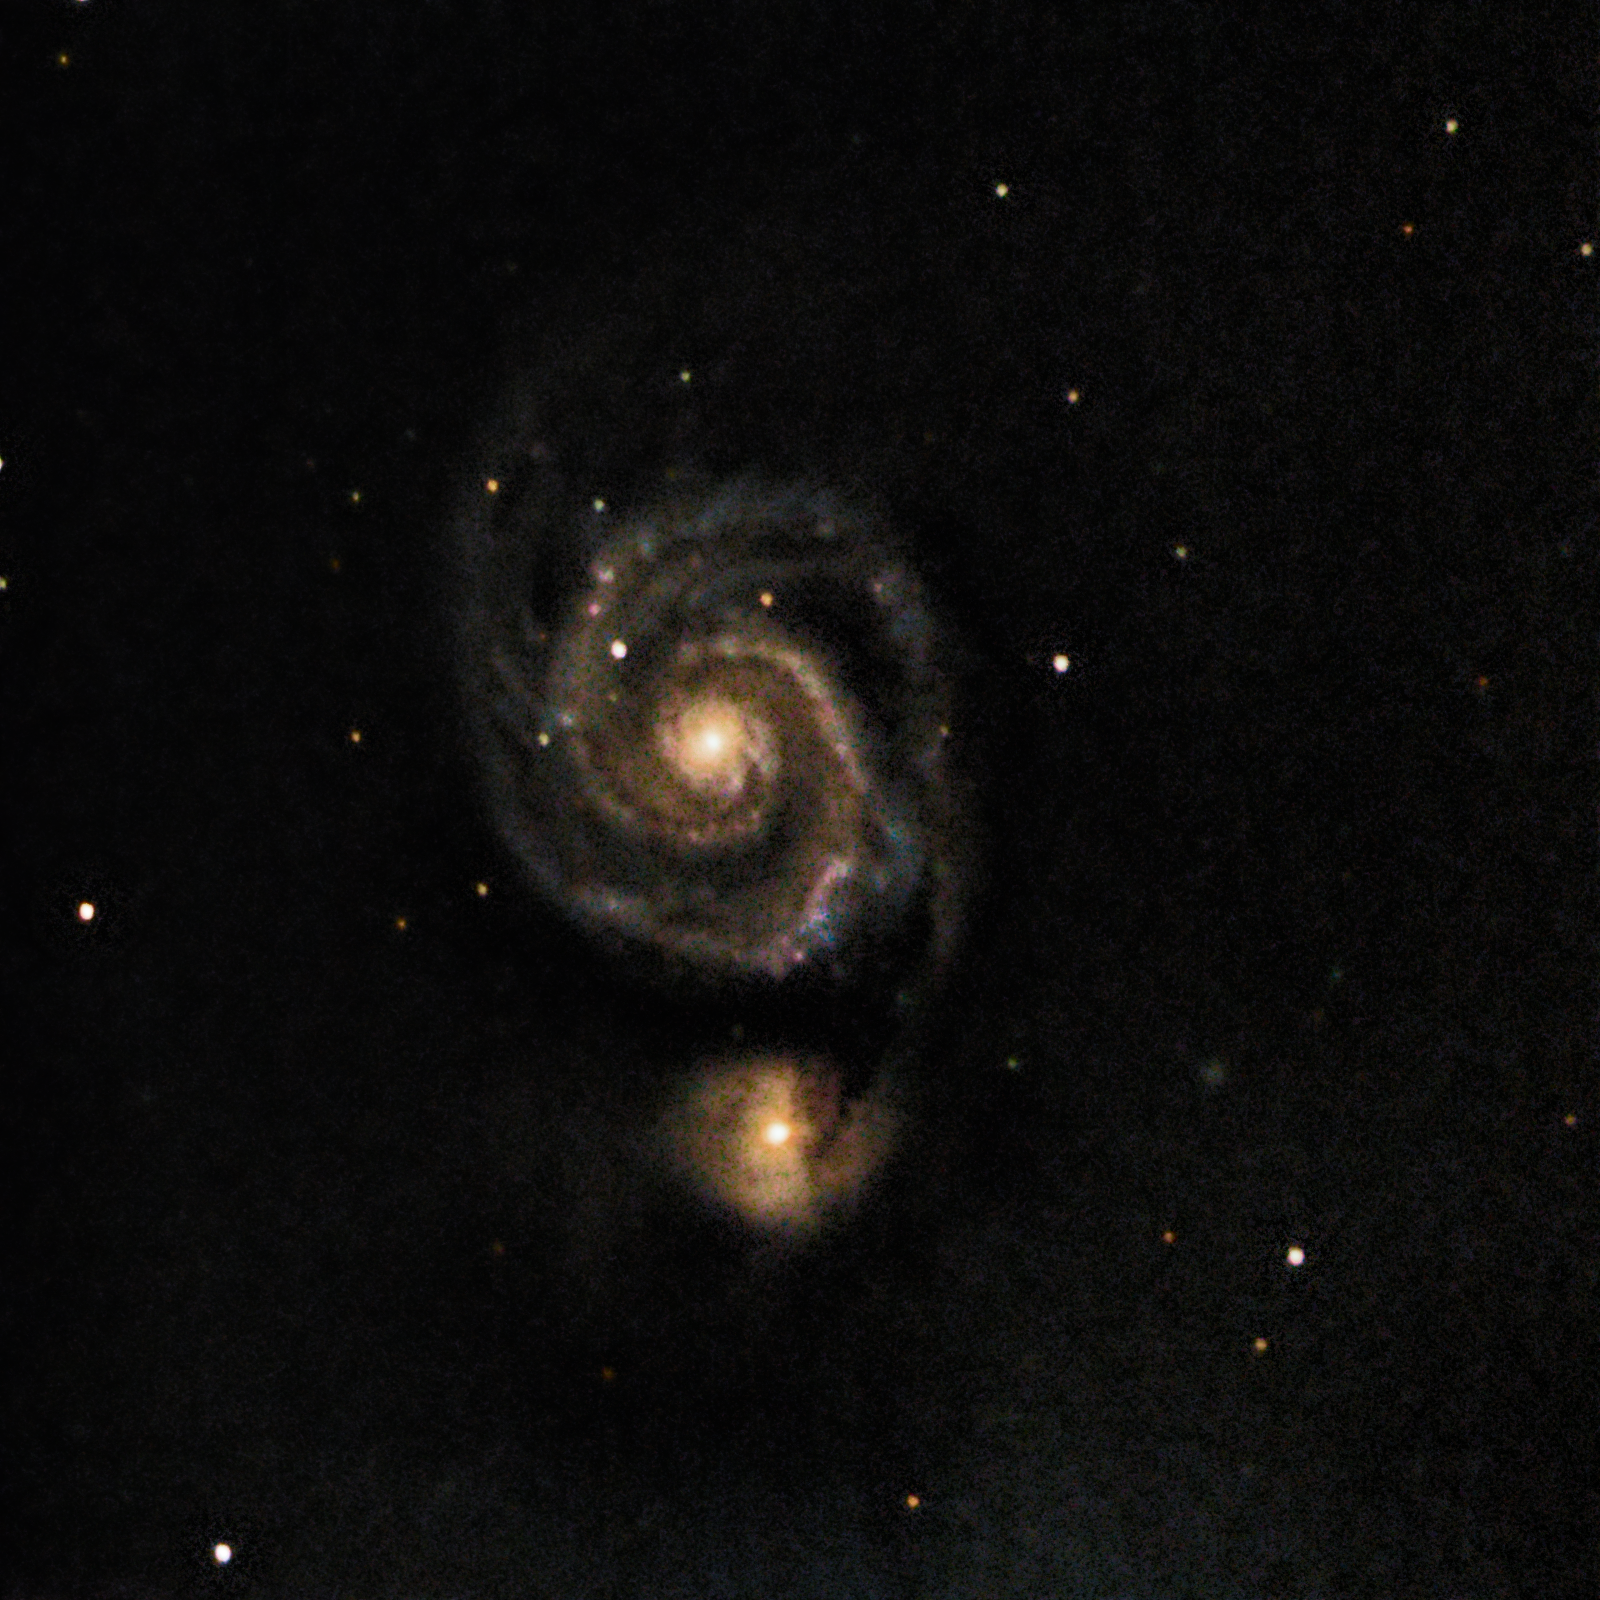 M51 - My first decent 16 bit stack and process